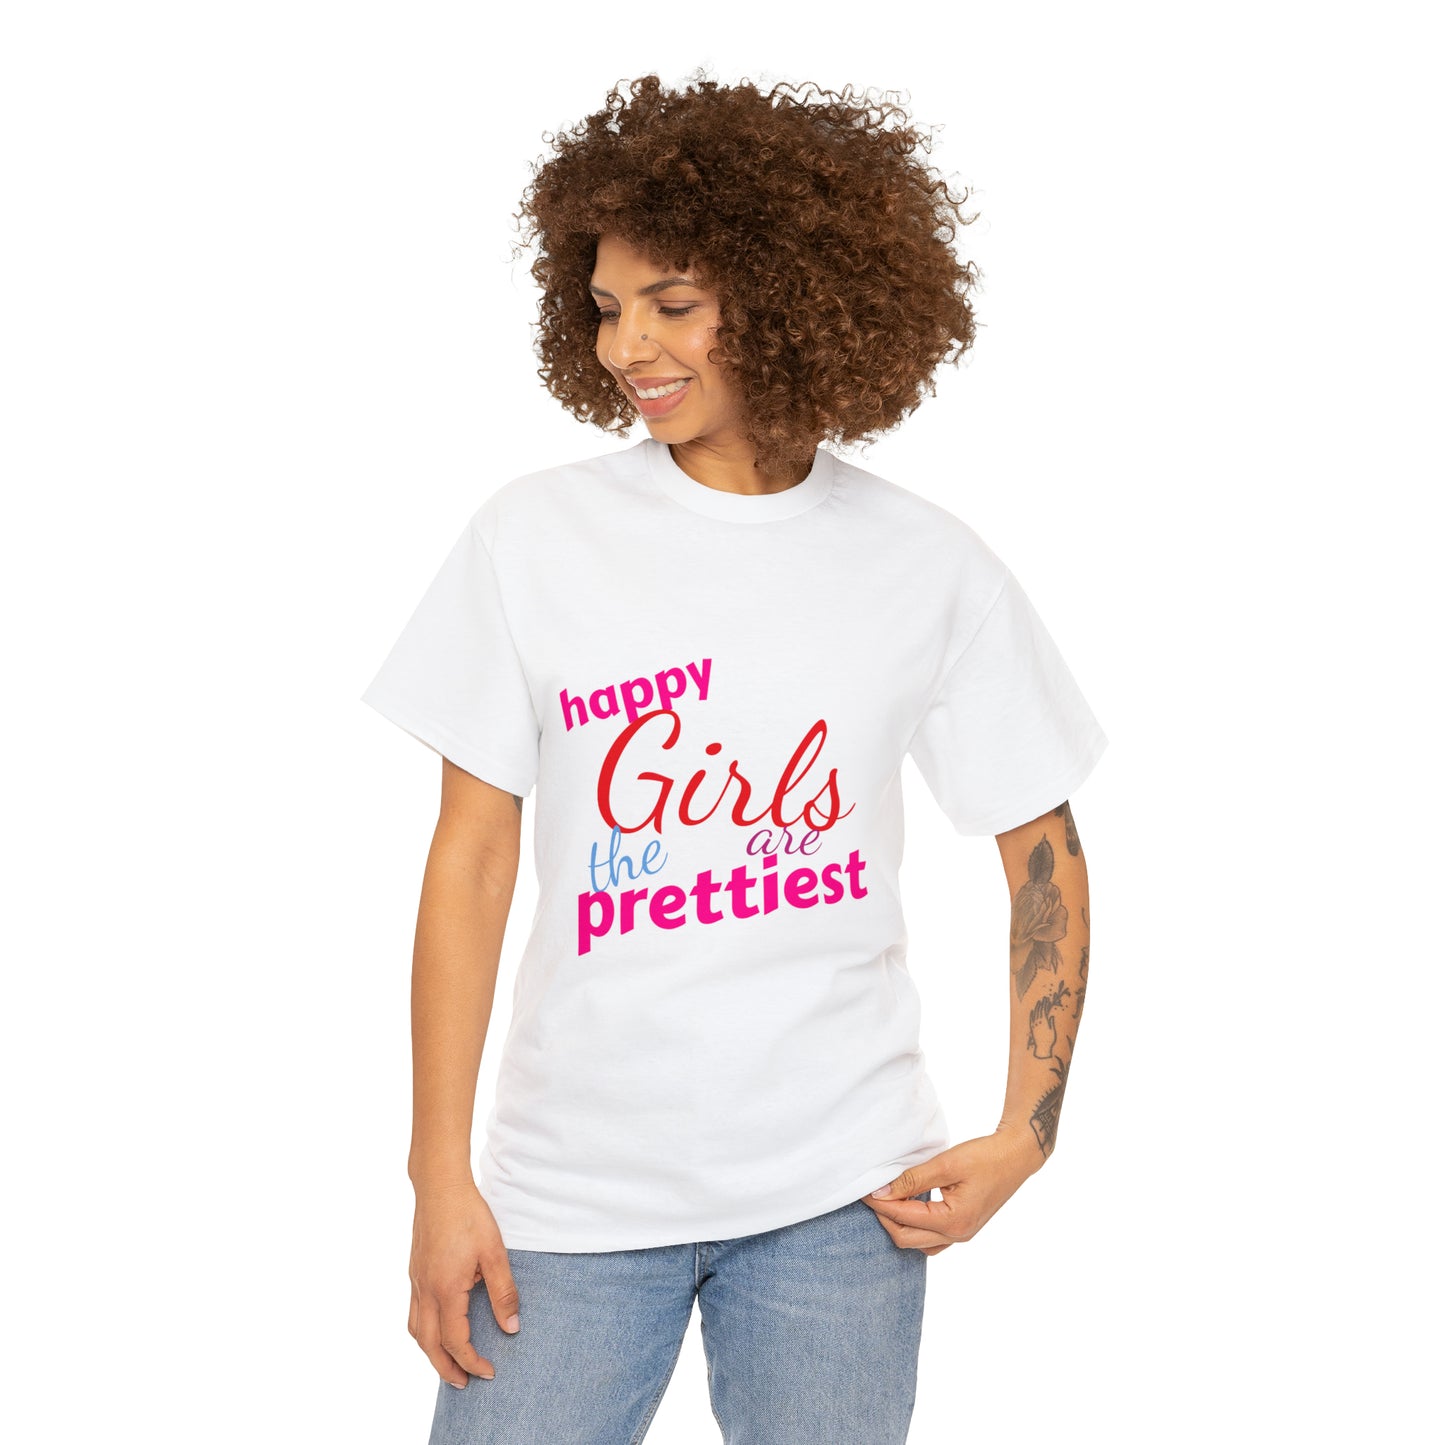 Short sleeve top - 'Happy Girls are the prettiest'